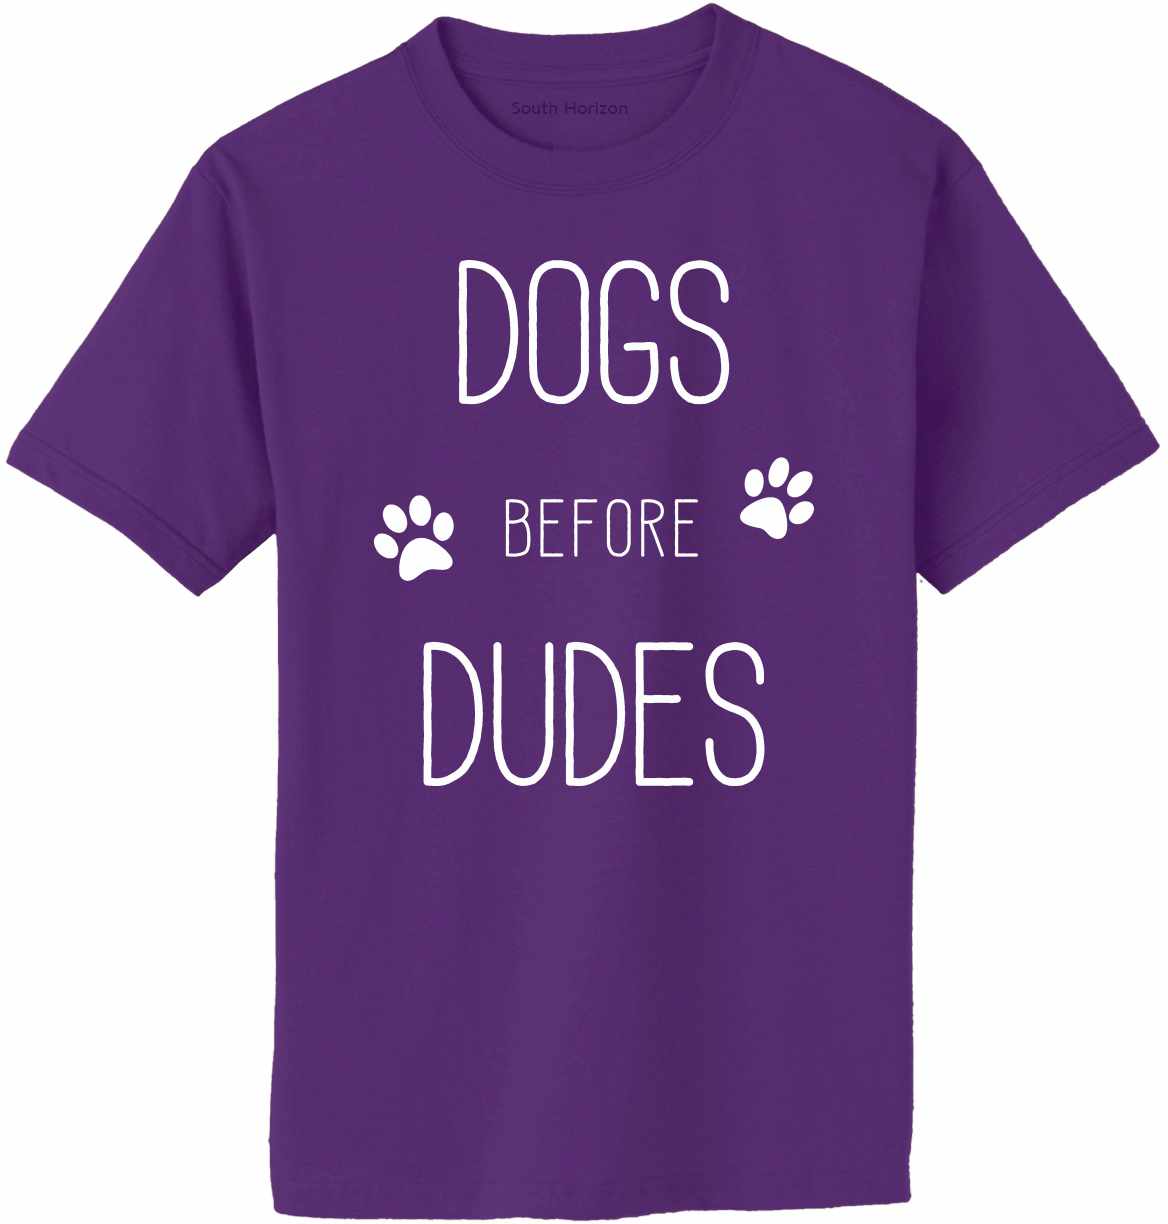 Dogs Before Dudes Adult T-Shirt